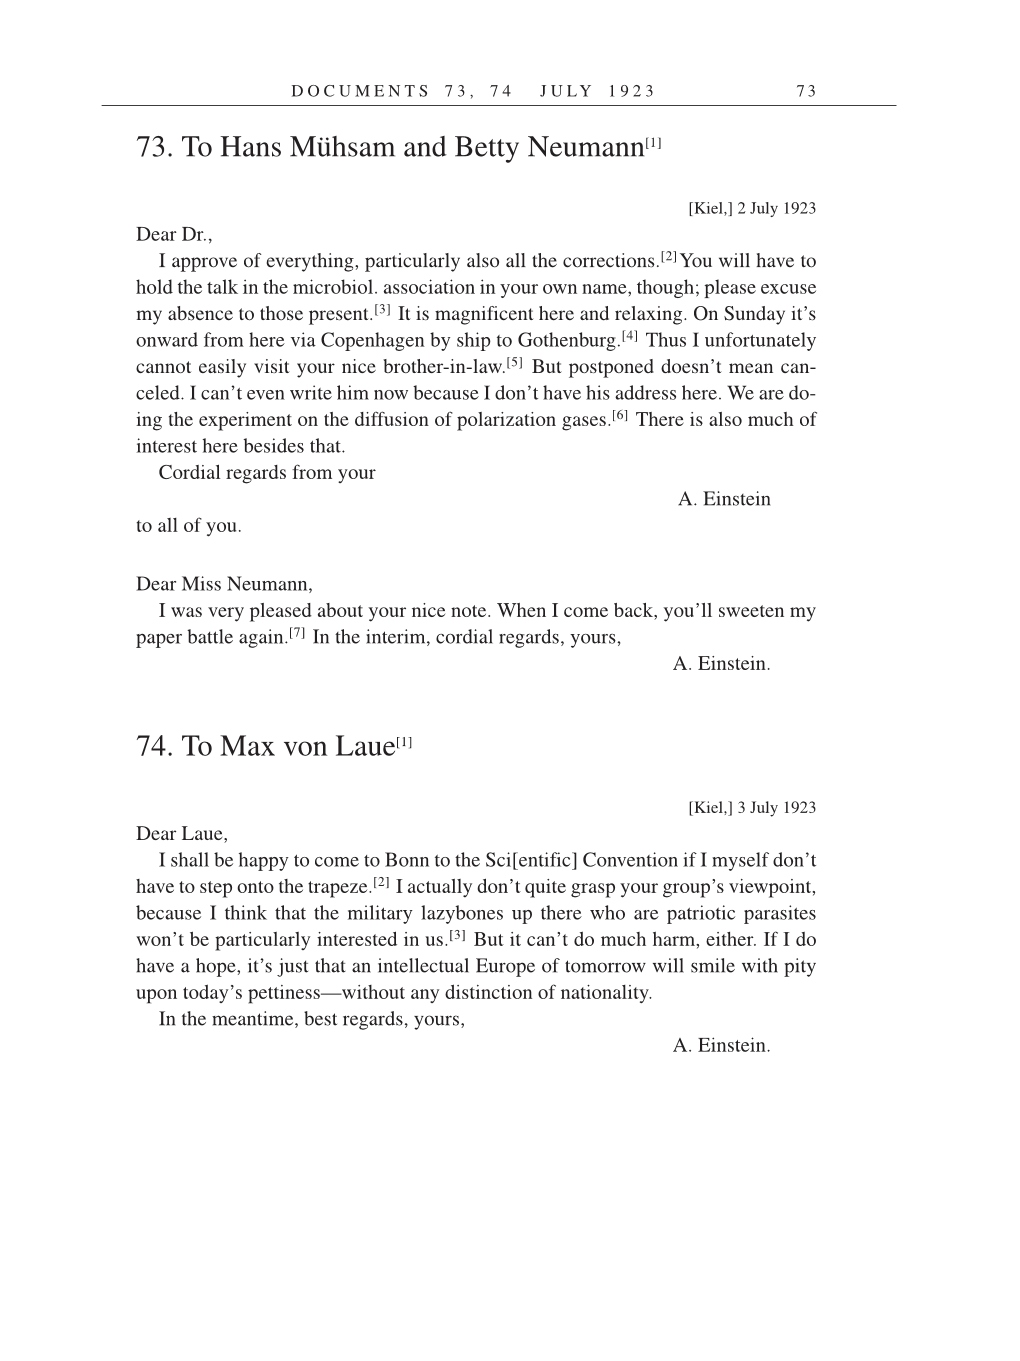 Volume 14: The Berlin Years: Writings & Correspondence, April 1923-May 1925 (English Translation Supplement) page 73